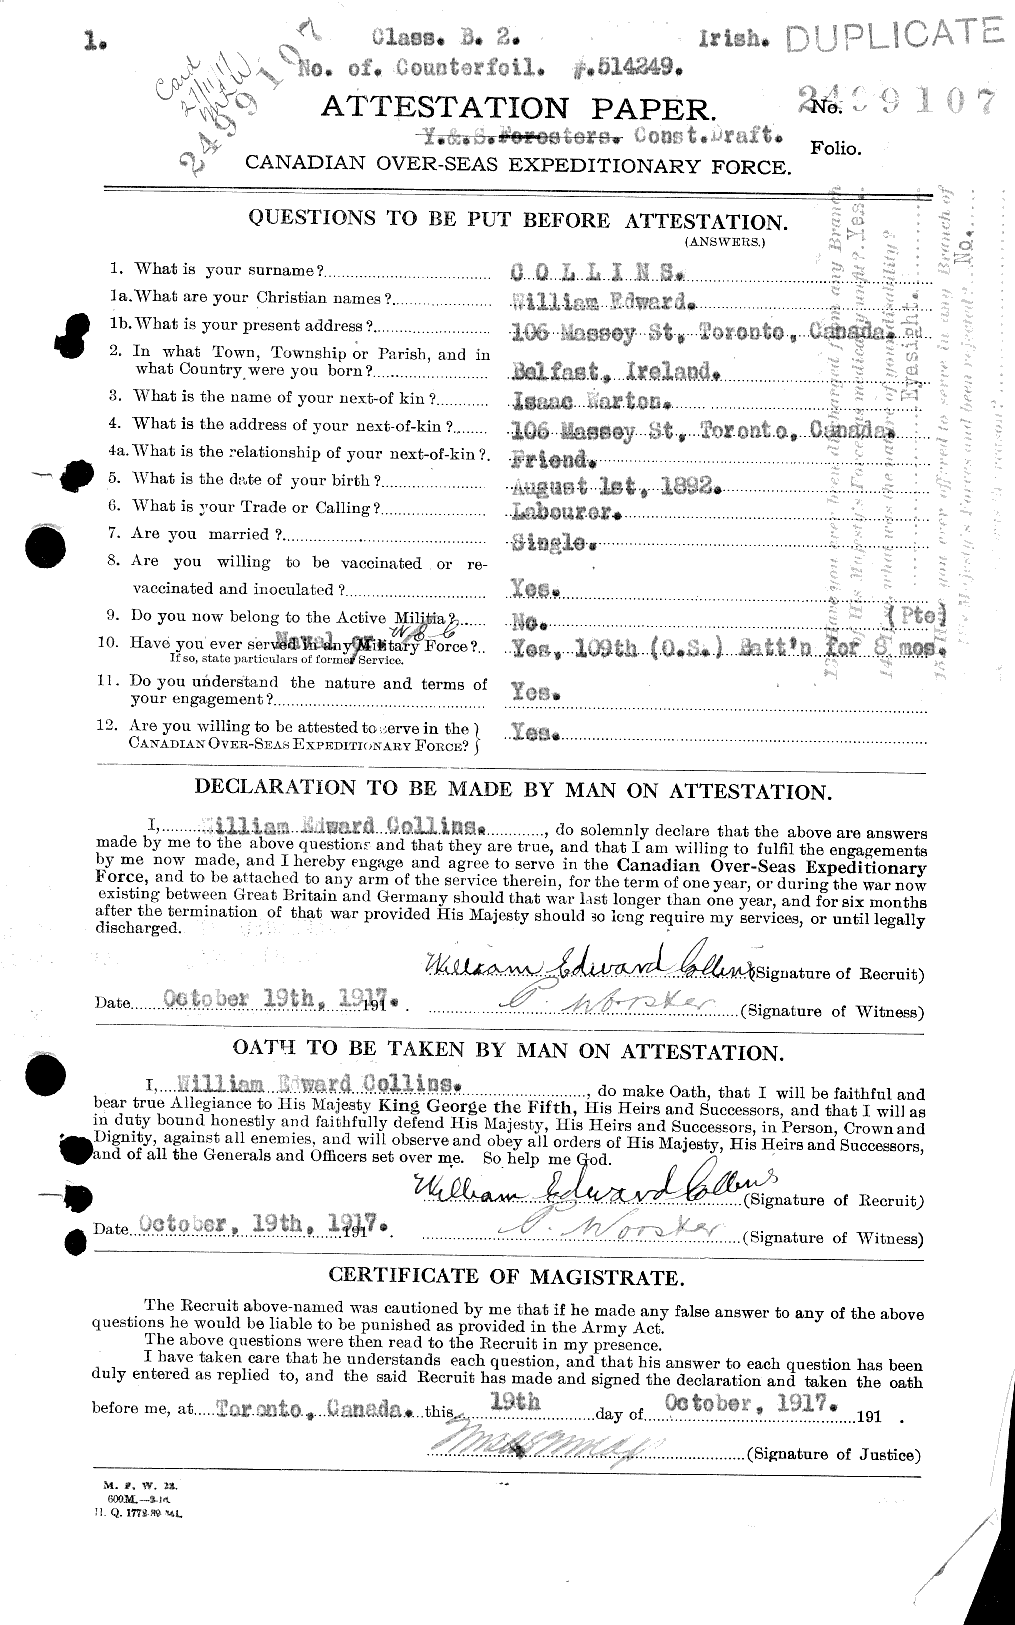 Personnel Records of the First World War - CEF 034598a